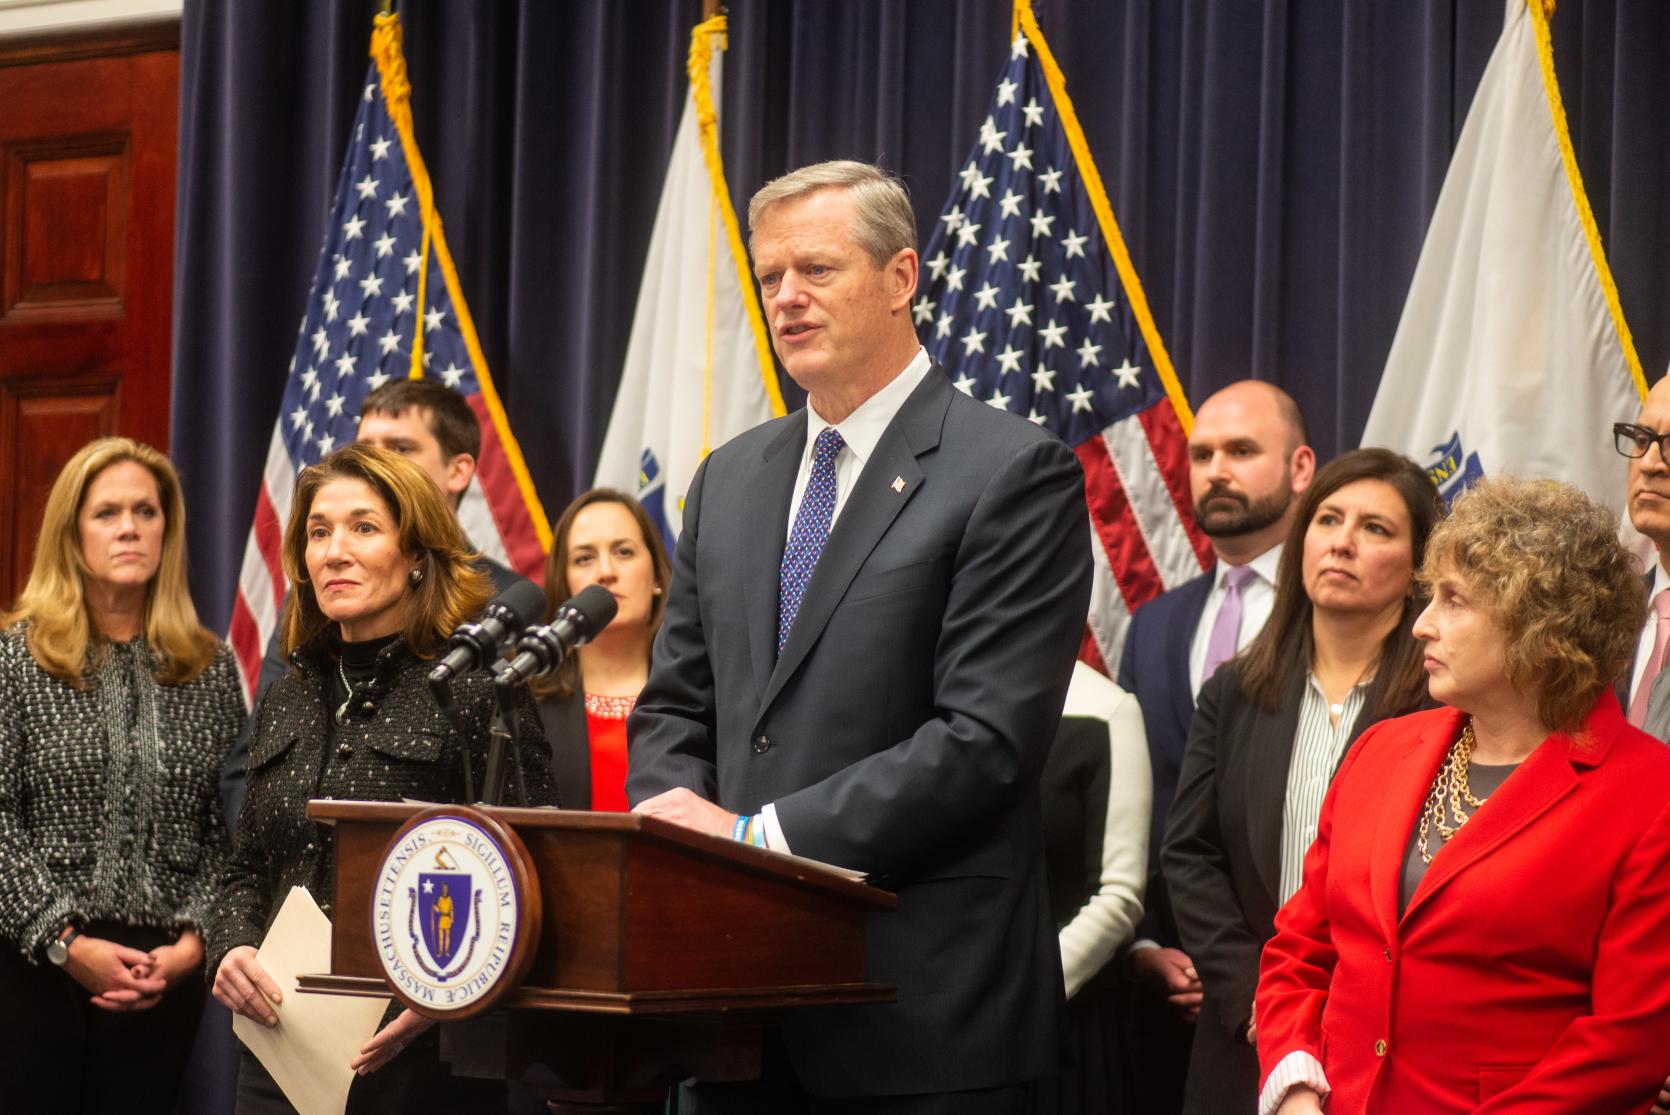 Governor Baker announces report and recommendations of the Commission on the Future of Transportation in the Commonwealth.